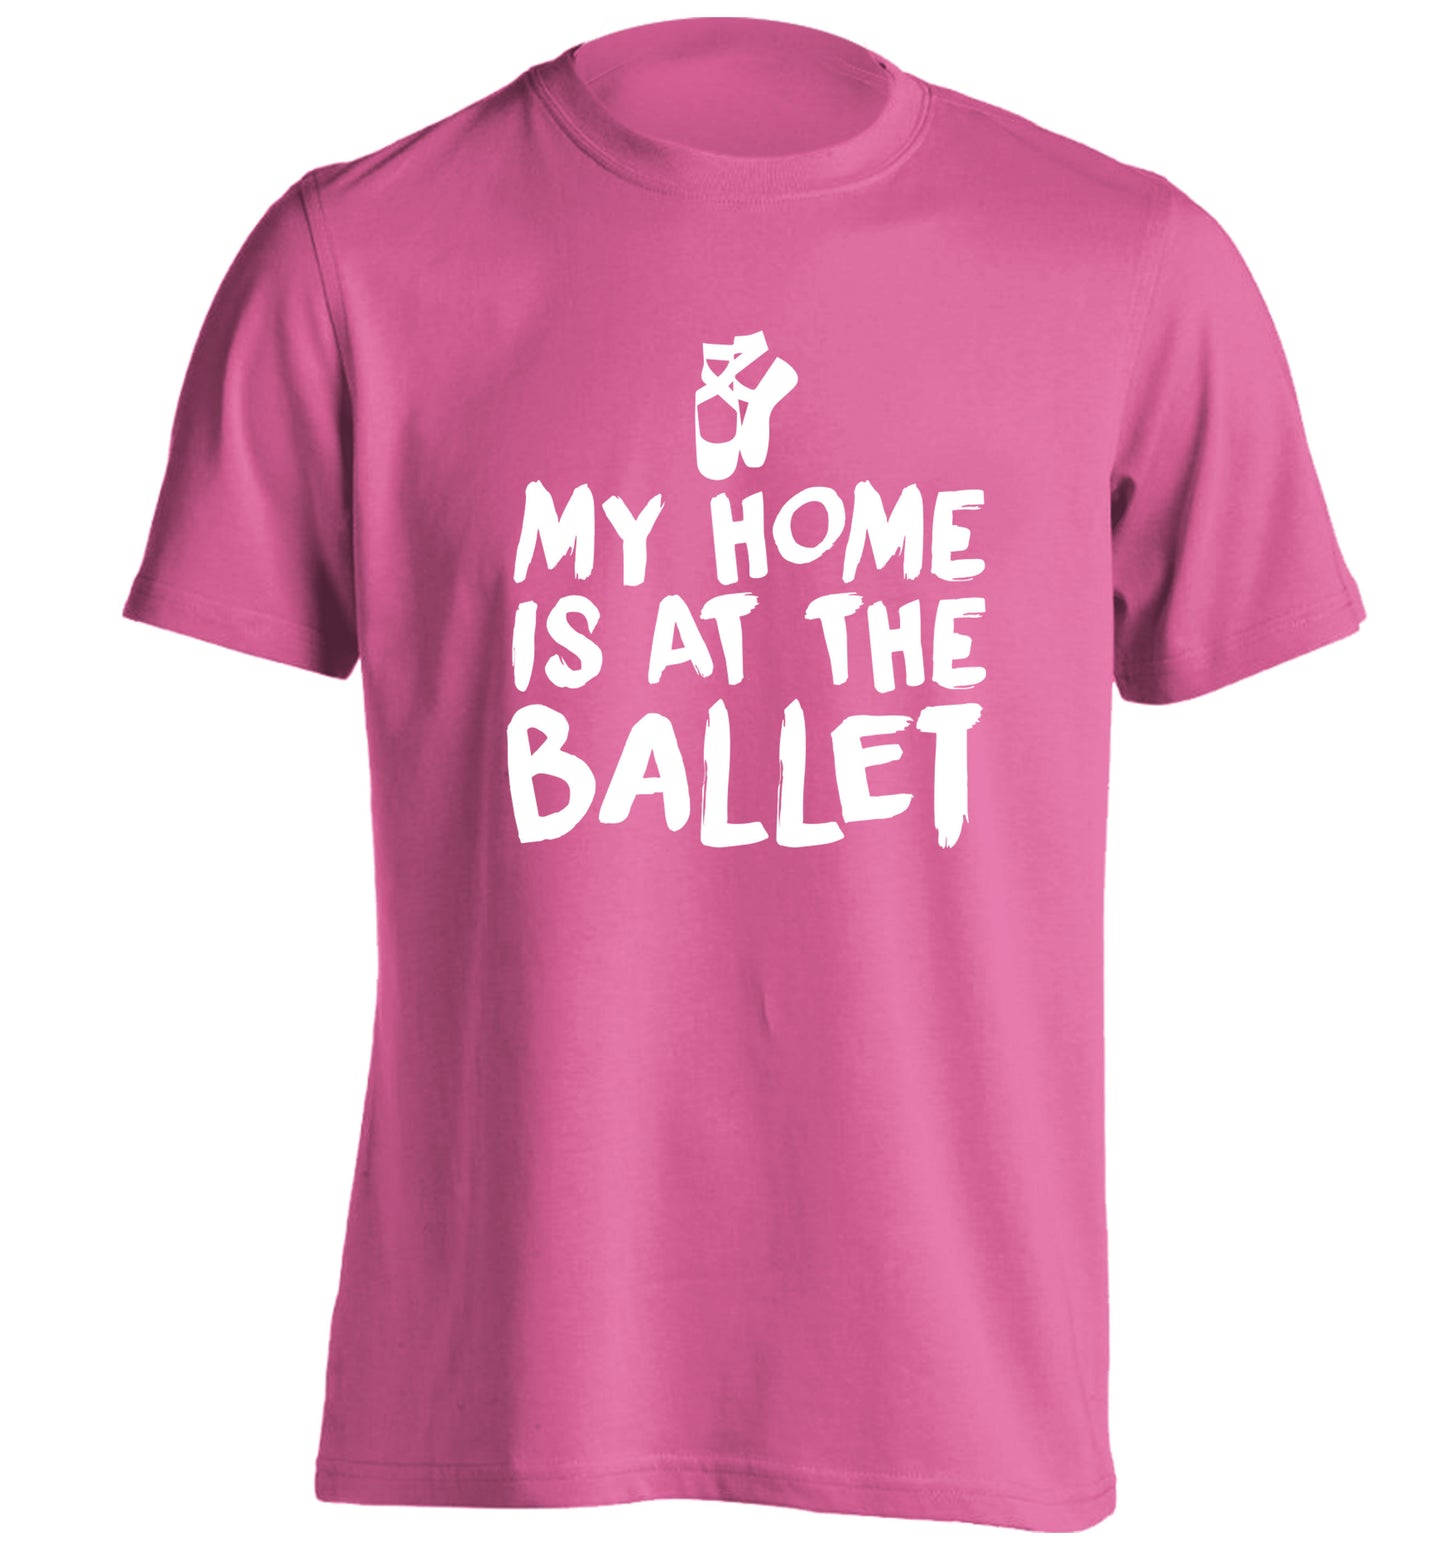 My home is at the dance studio adults unisex pink Tshirt 2XL